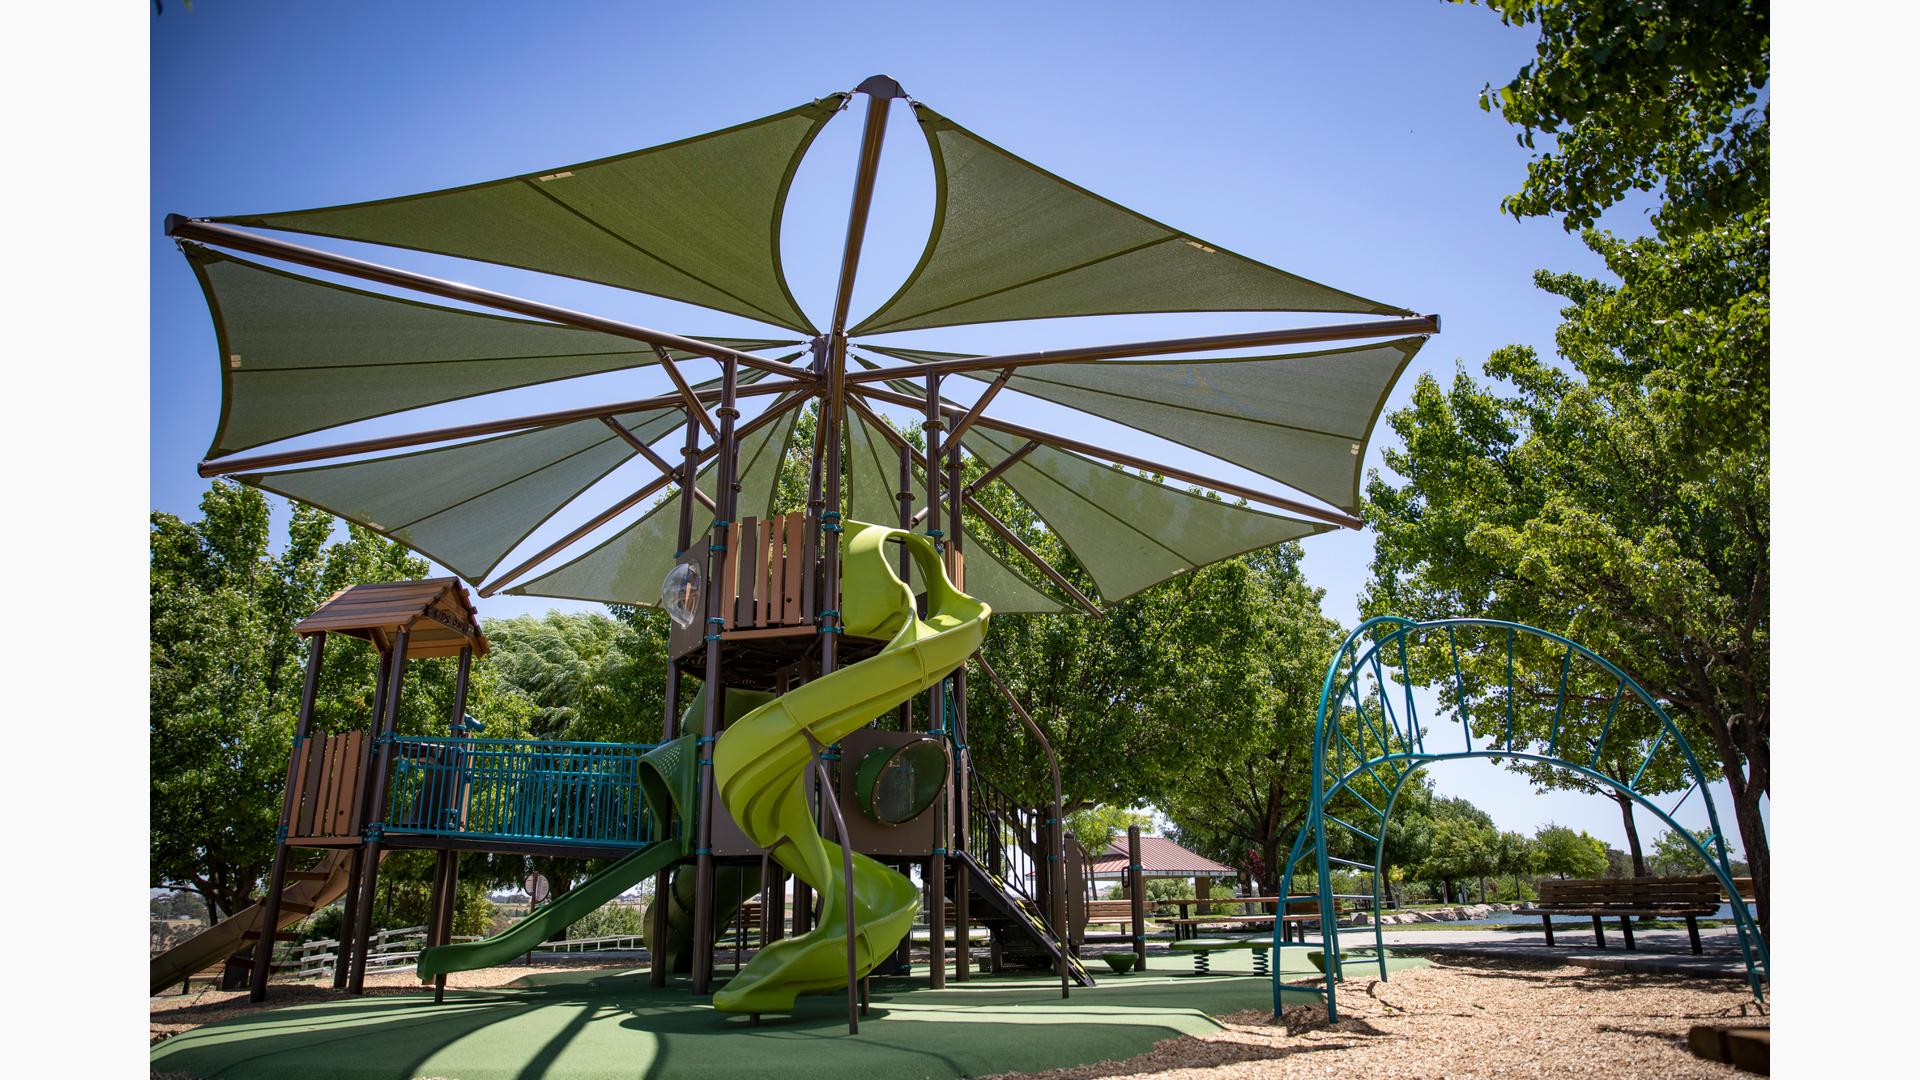 A play area surrounded by mature lush trees has a large tree fort like play structure tower with a large octagonal shade overhead. An additional arched ladder climber sits just to the right of the large play structure. 